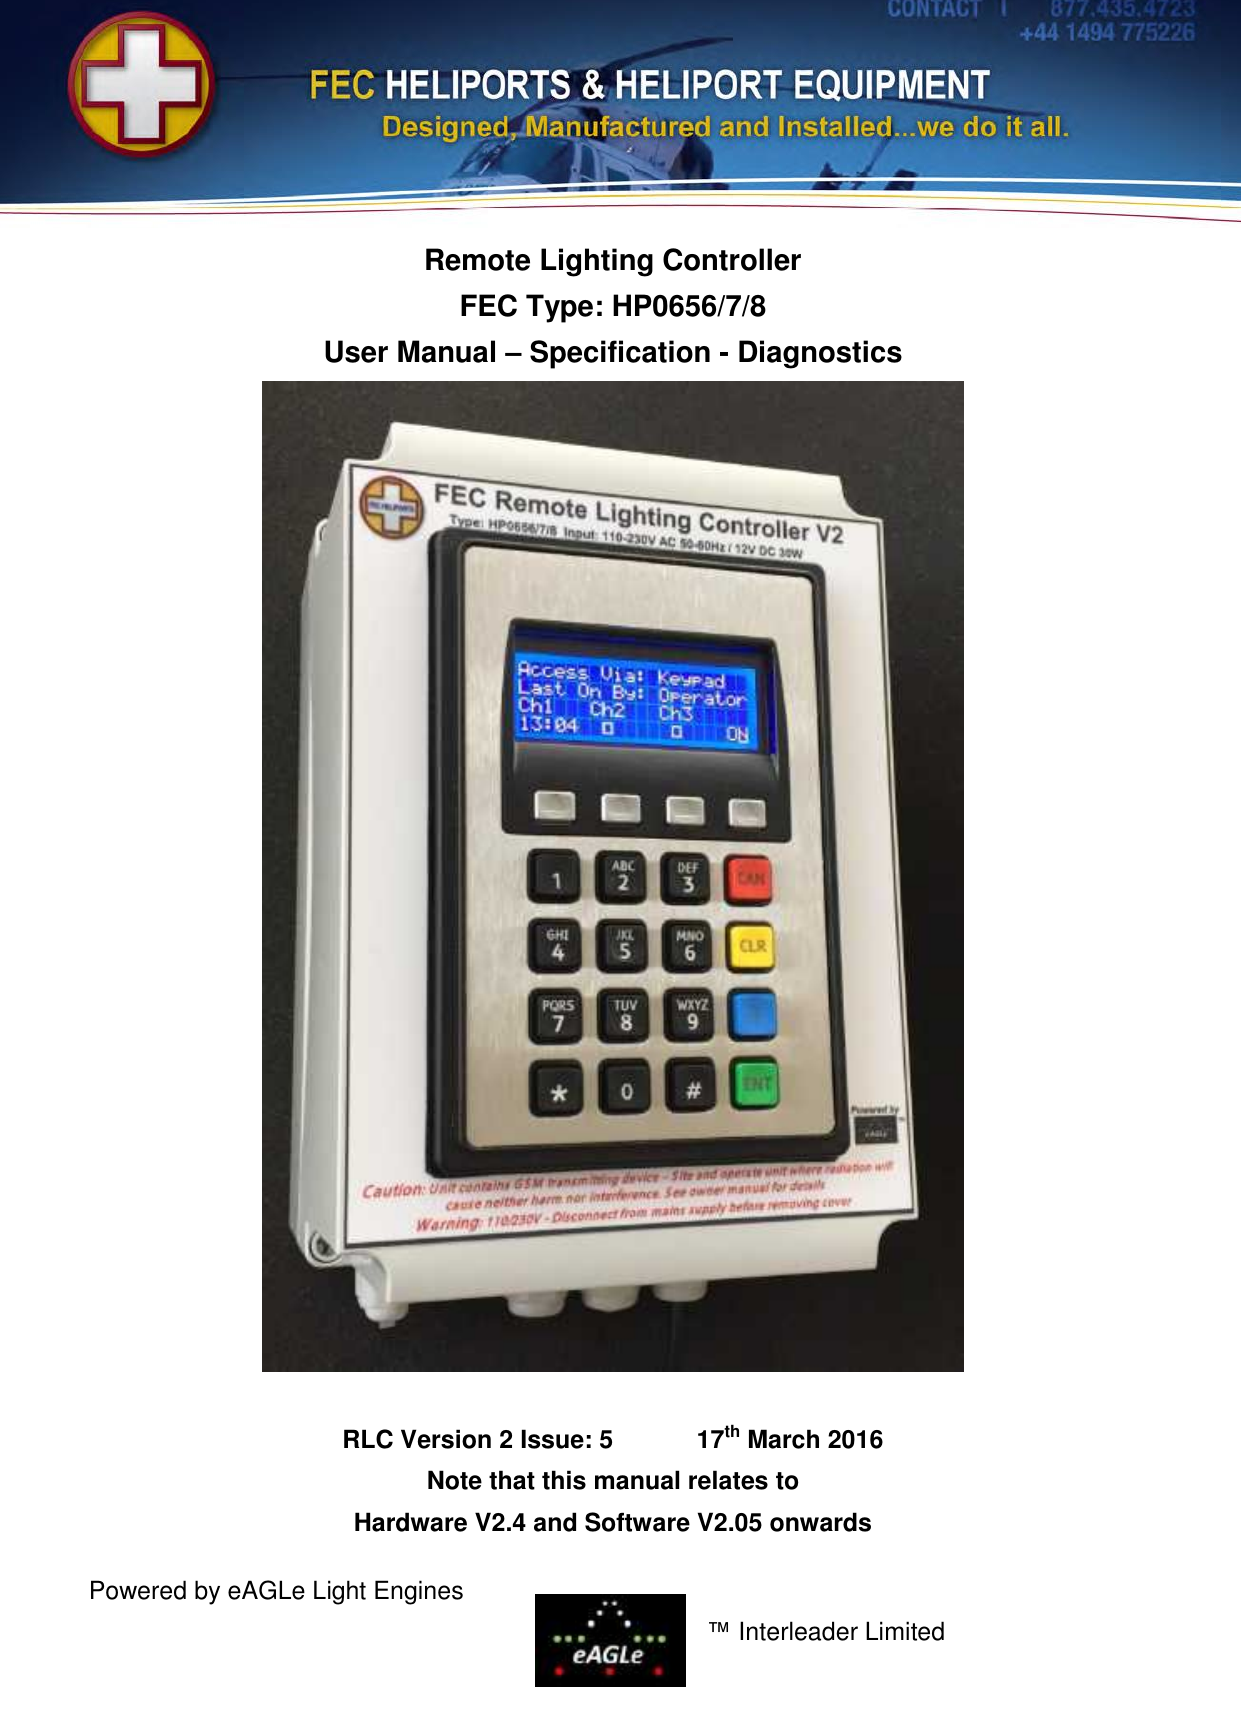  Powered by eAGLe Light Engines     ™ Interleader Limited  Remote Lighting Controller FEC Type: HP0656/7/8 User Manual – Specification - Diagnostics   RLC Version 2 Issue: 5            17th March 2016 Note that this manual relates to Hardware V2.4 and Software V2.05 onwards  